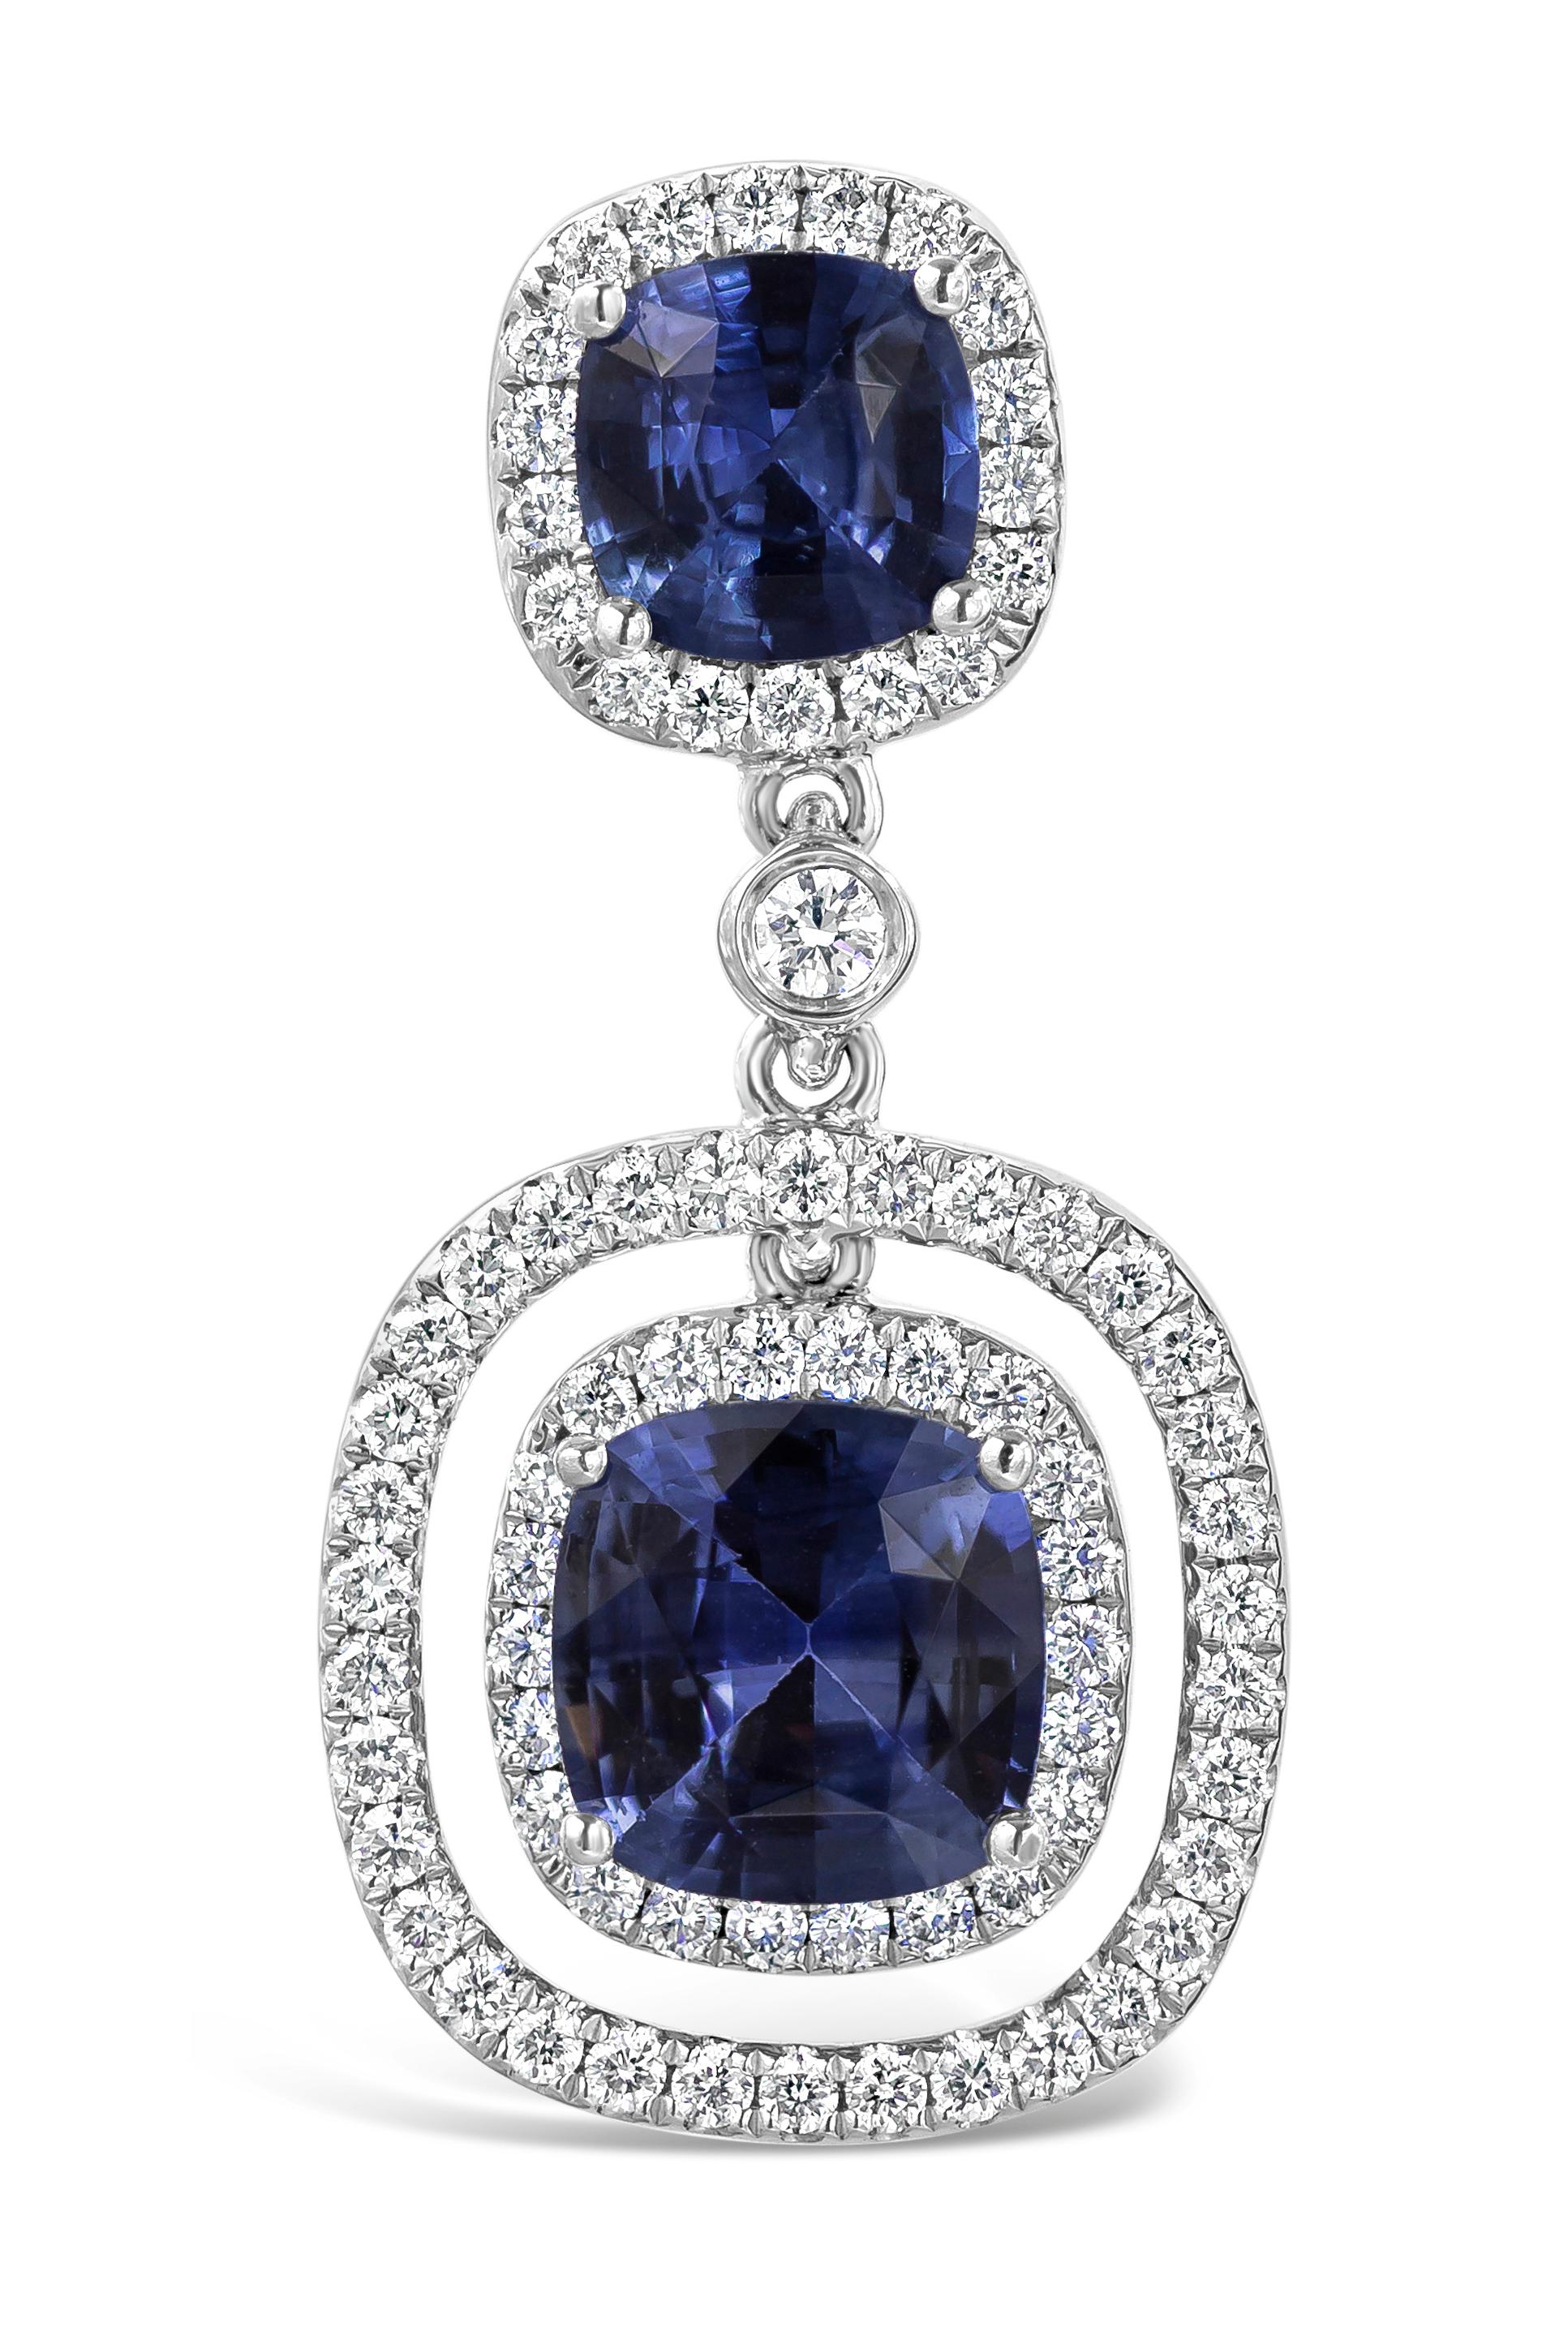 A stunning pair of gemstone dangle earrings showcasing four cushion cut blue sapphires set in four pong setting, surrounded by halo of brilliant round diamonds. Blue sapphires weighs 3.96 carats total and white diamonds weighs 0.76 carats total.